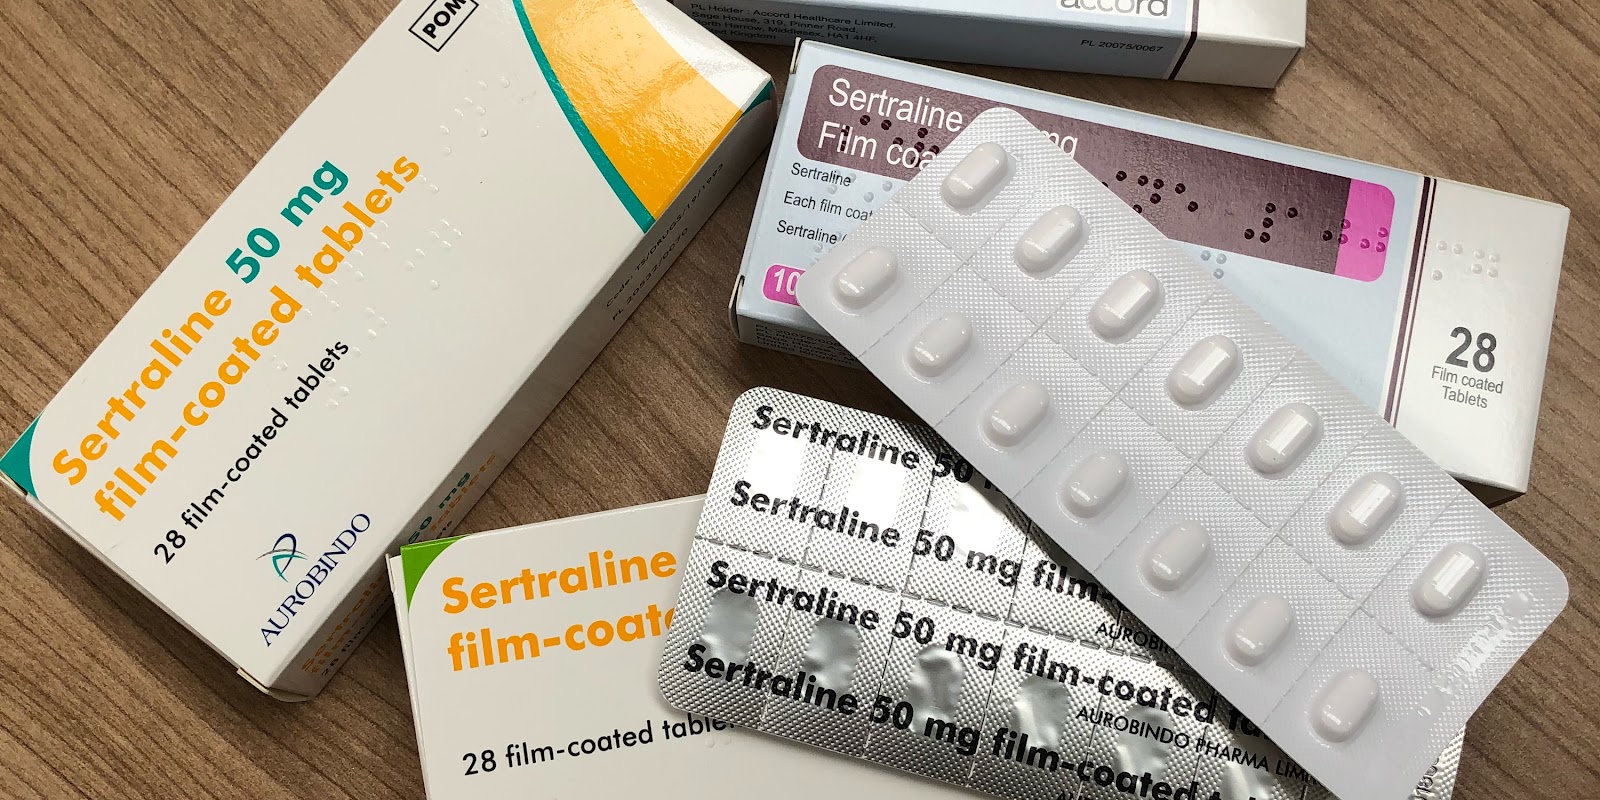 What is sertraline? Facts on uses, benefits and side effects - Echo Pharmacy